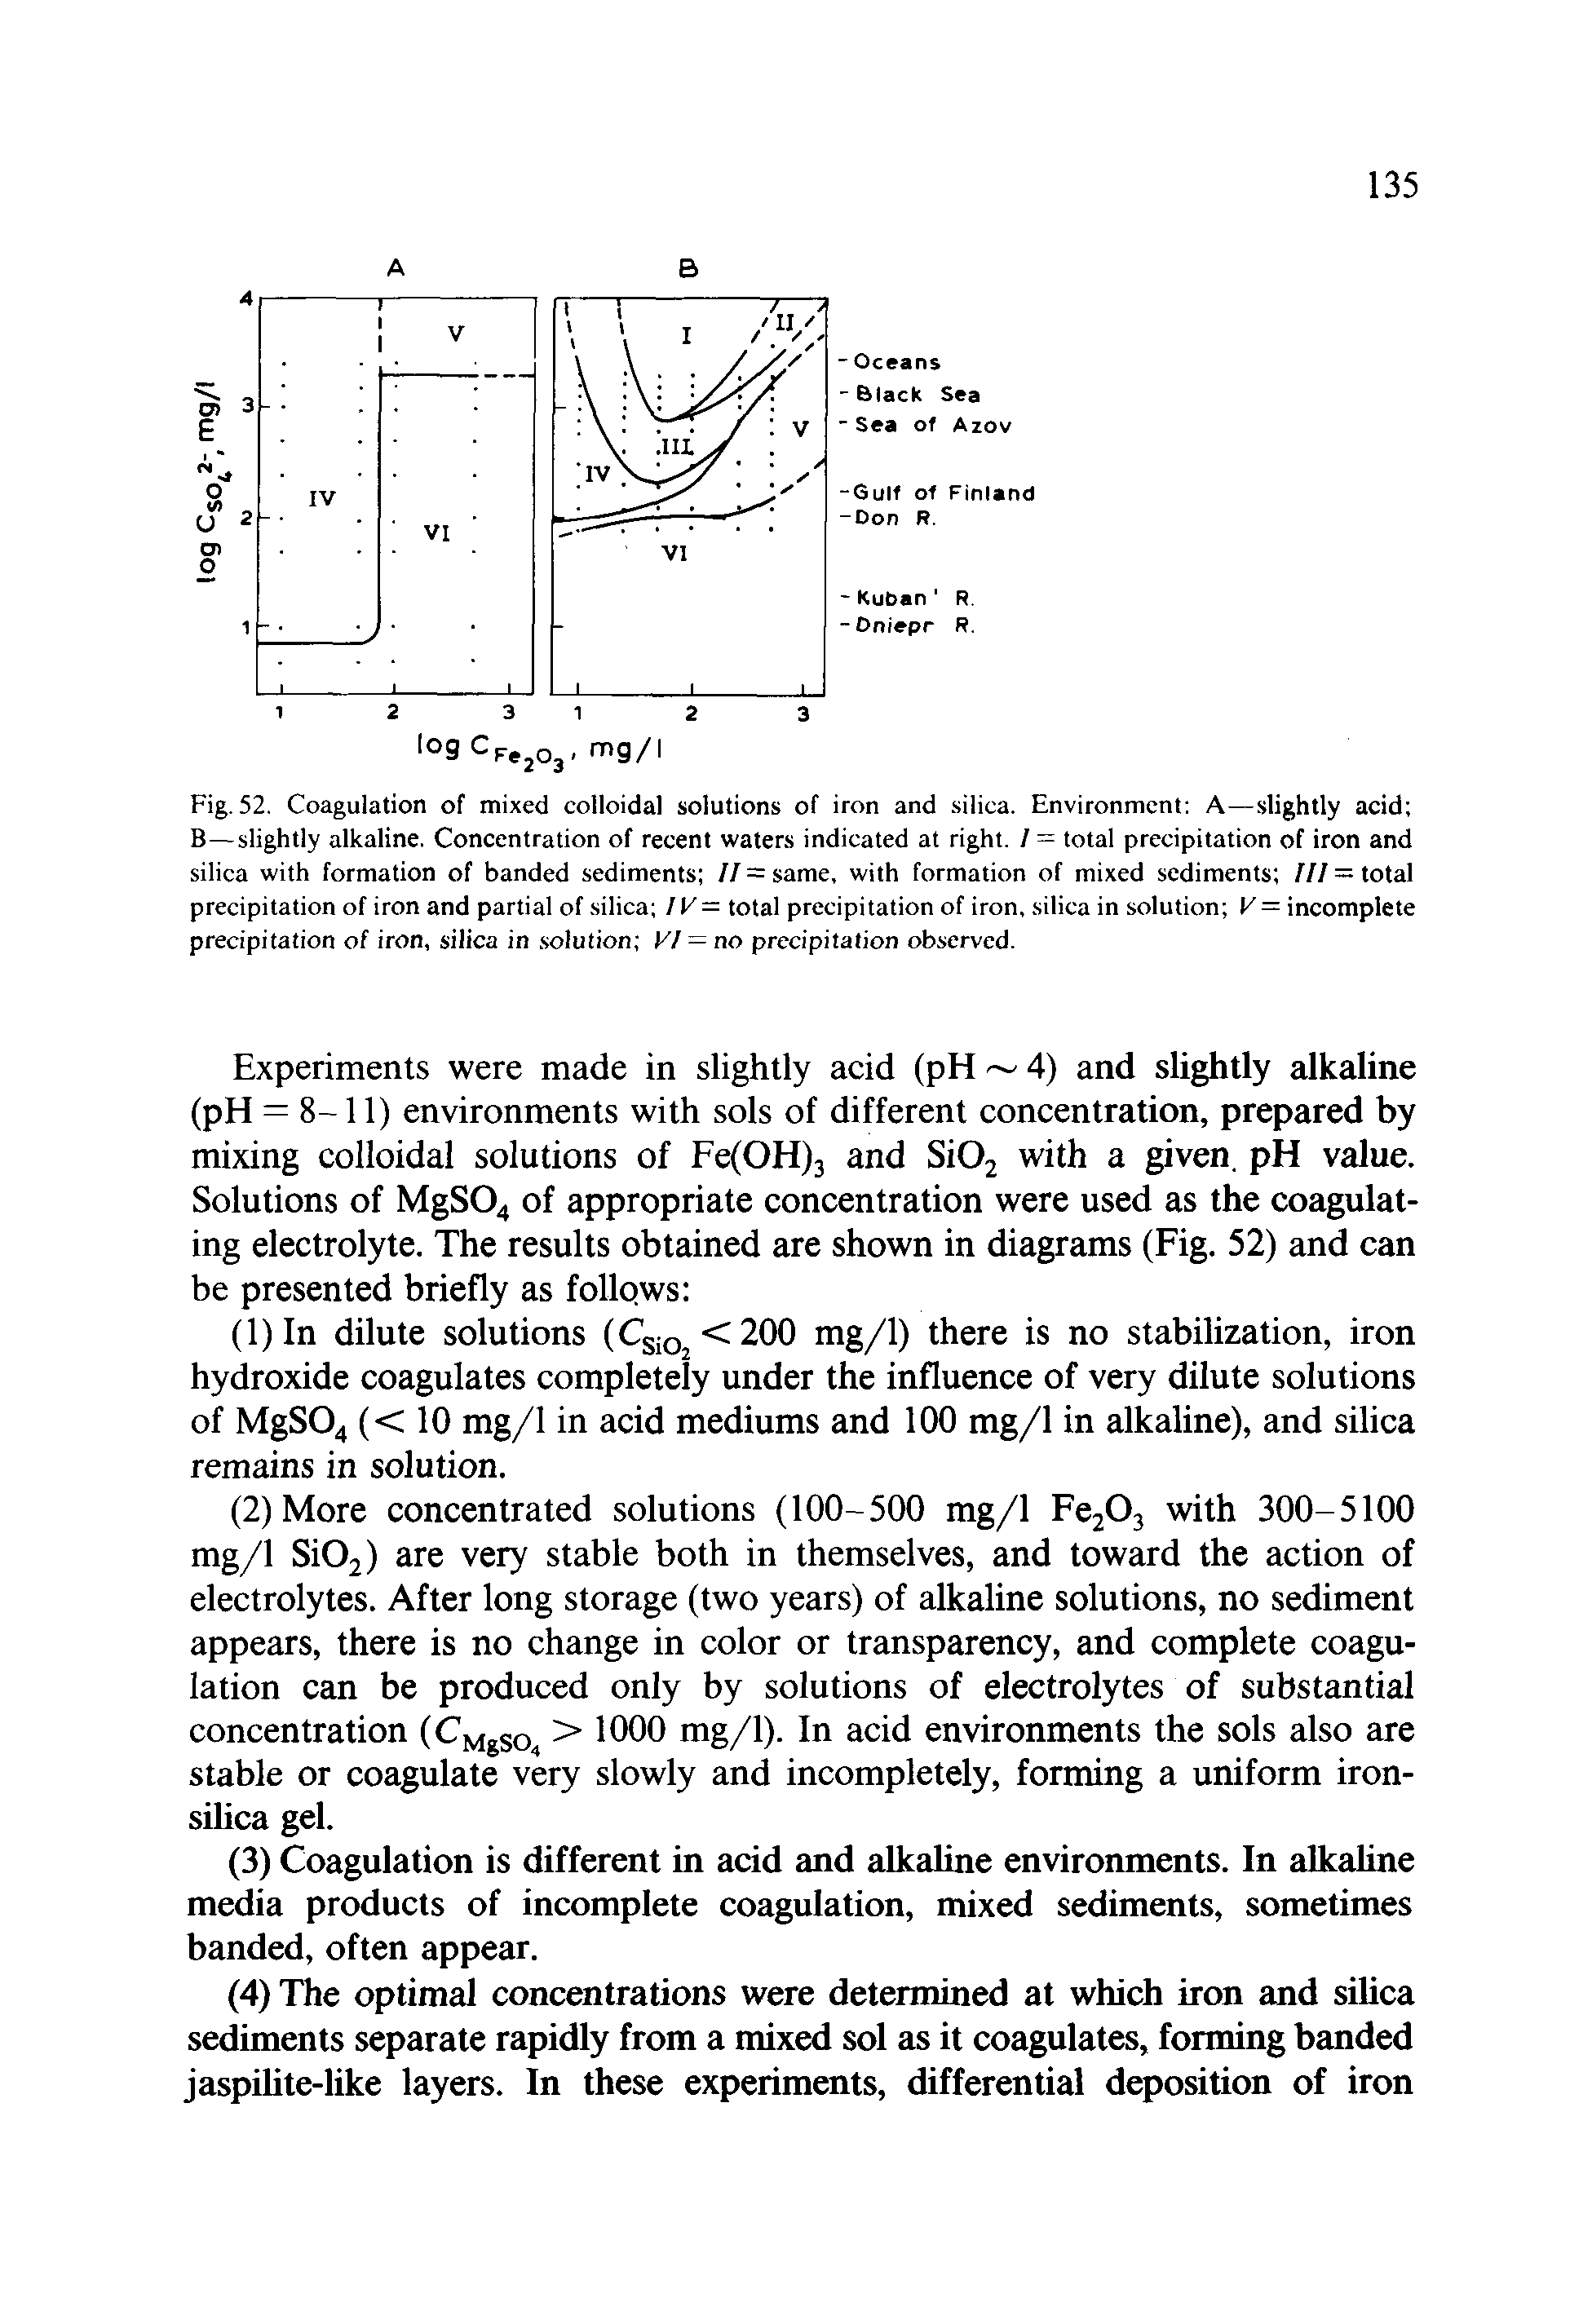 Fig. 52. Coagulation of mixed colloidal solutions of iron and silica. Environment A—slightly acid B—slightly alkaline. Concentration of recent waters indicated at right. / = total precipitation of iron and silica with formation of banded sediments // = same, with formation of mixed sediments /// = total precipitation of iron and partial of silica / F= total precipitation of iron, silica in solution V = incomplete precipitation of iron, silica in solution VI— no precipitation observed.